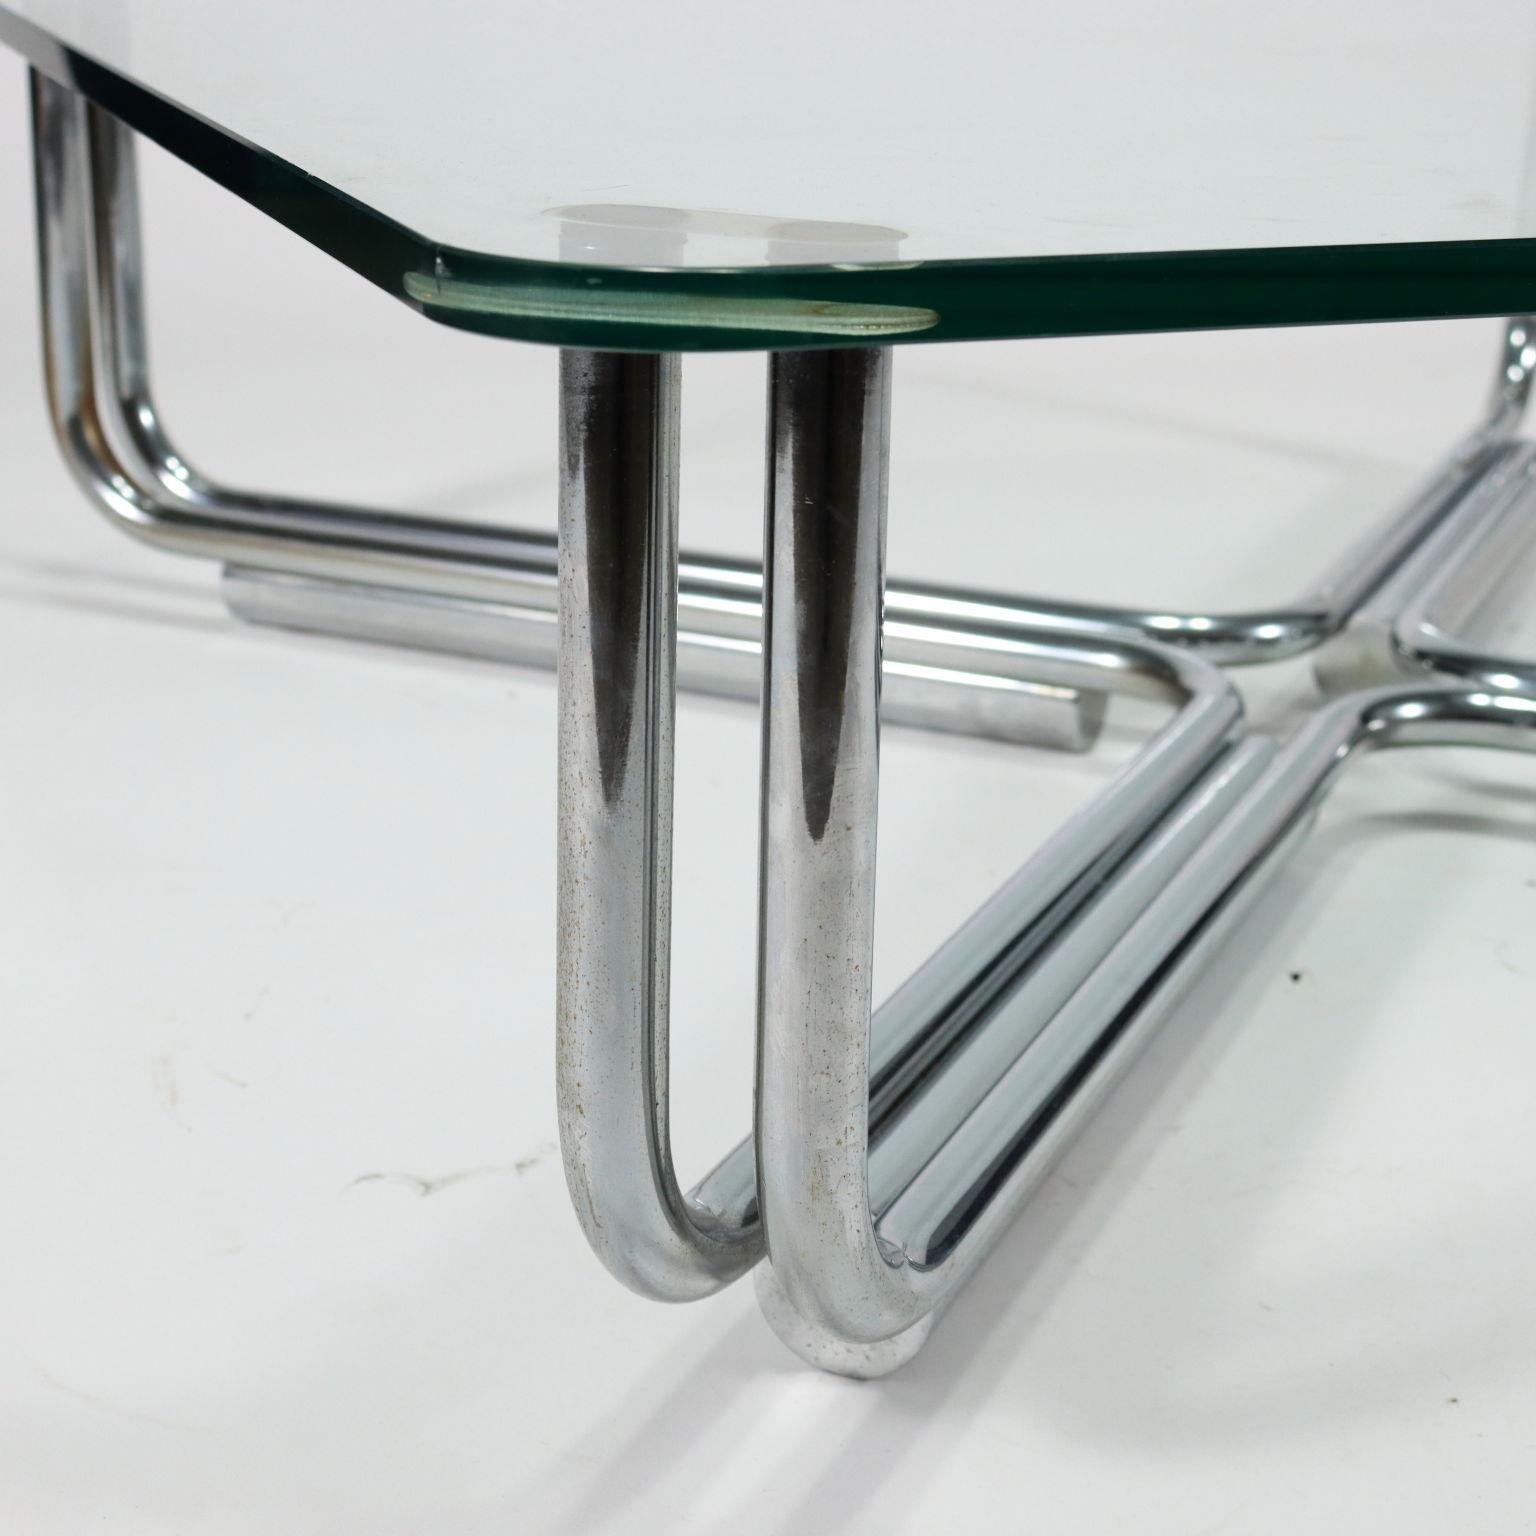 Polychromed 784 Coffee Table by Gianfranco Frattini for Cassina 1960s-70s